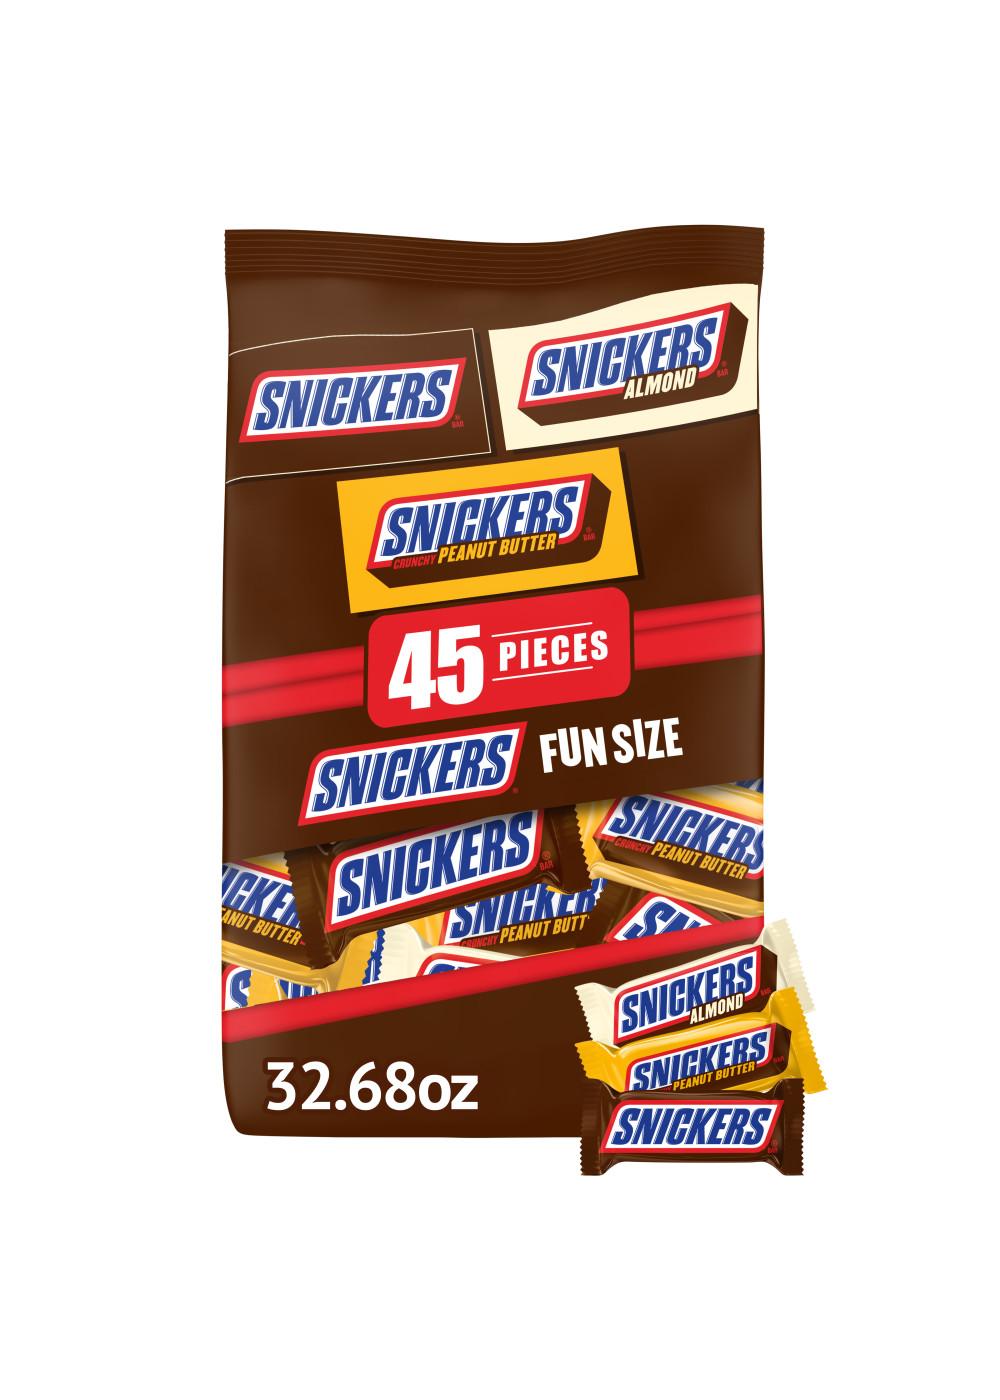 Snickers Assorted Chocolate Fun Size Candy Bars; image 2 of 11